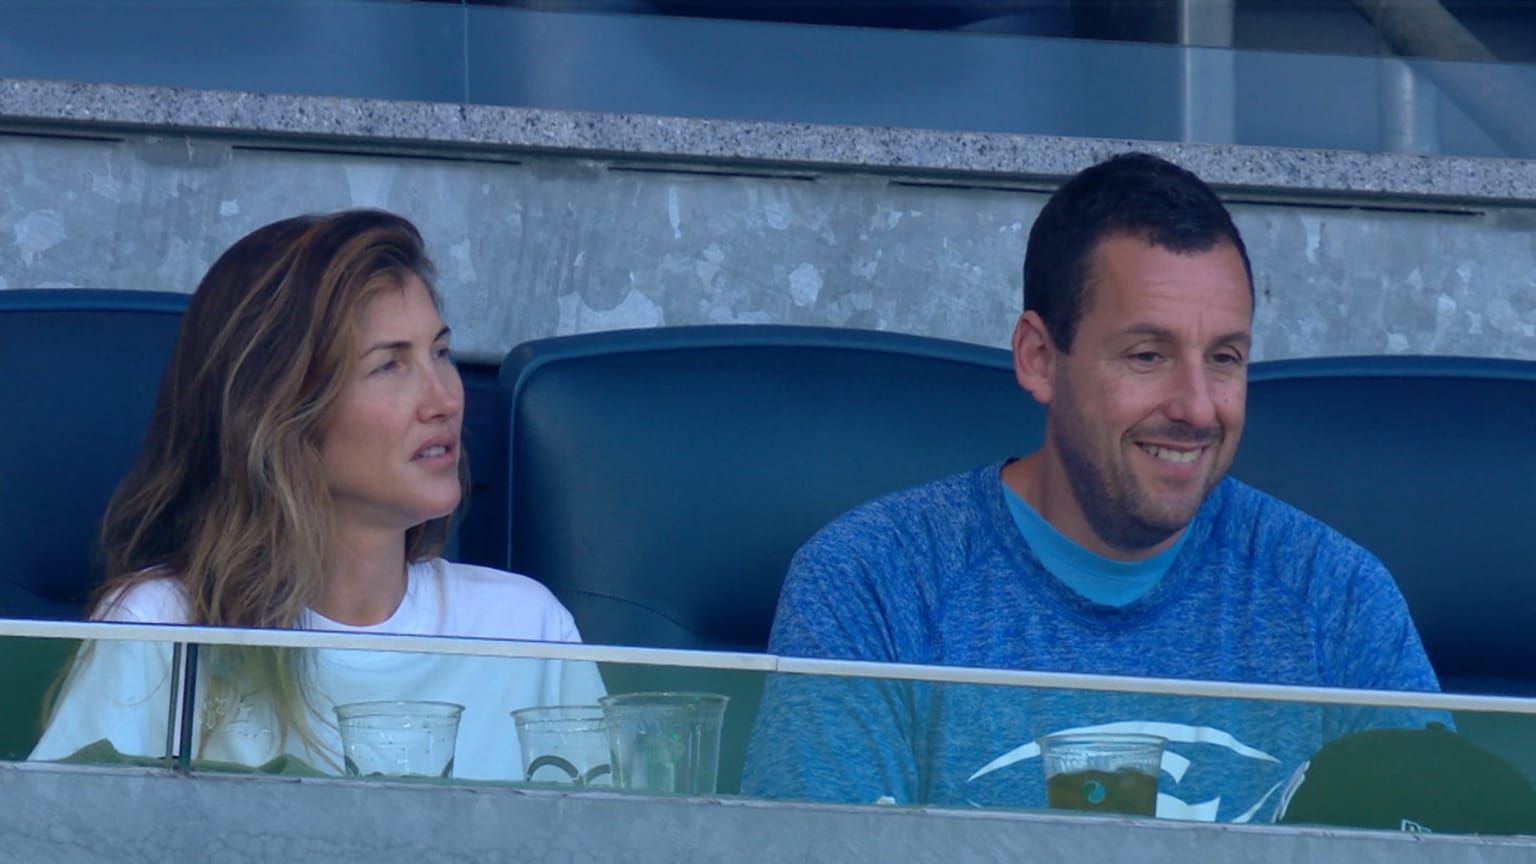 MLB - That's quacktastic! 🦆 Adam Sandler had a message for Aaron